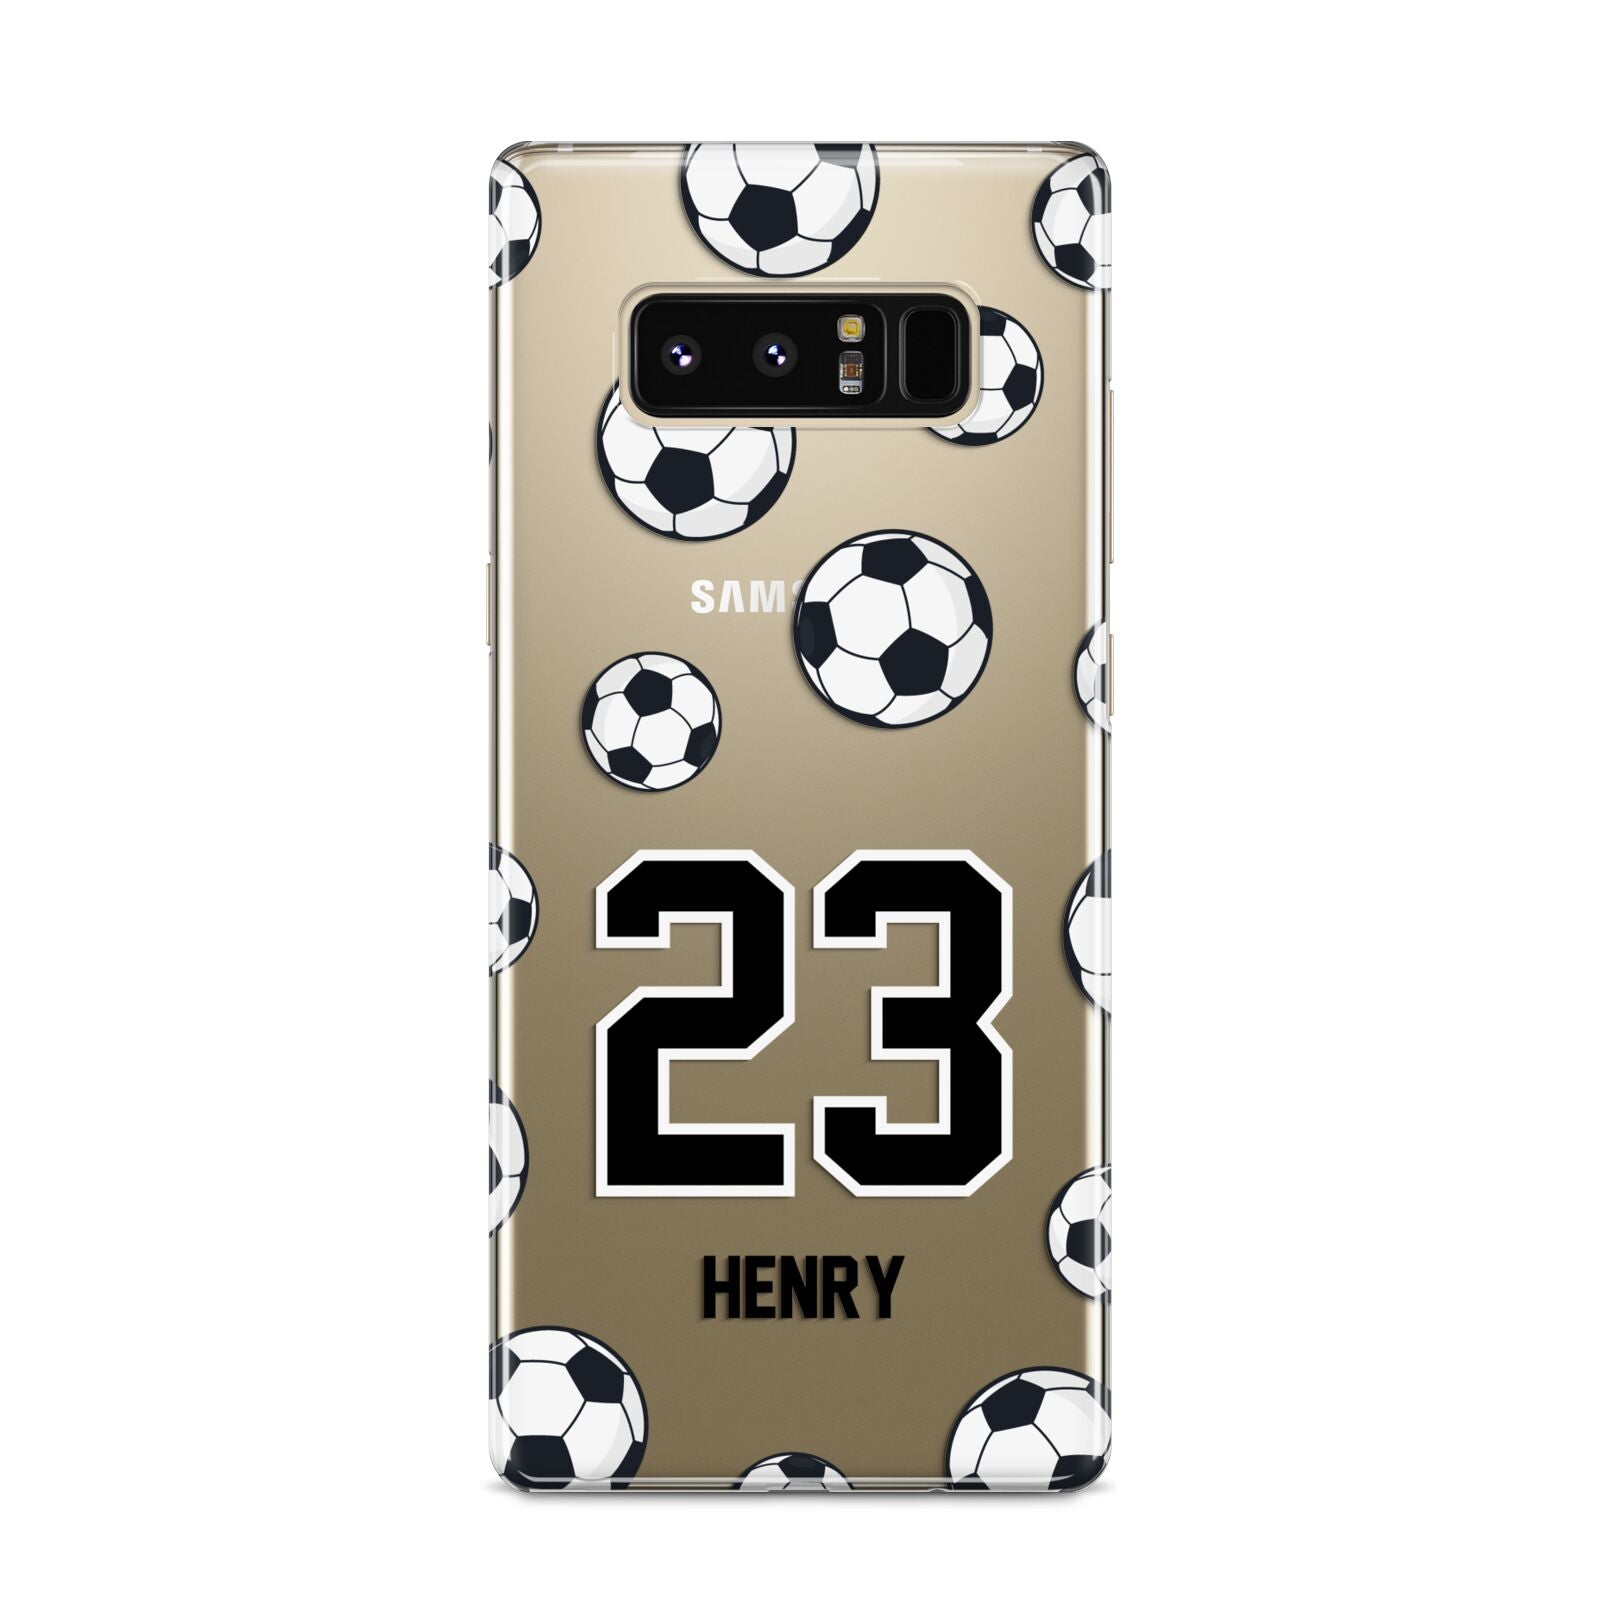 Personalised Football Samsung Galaxy S8 Case